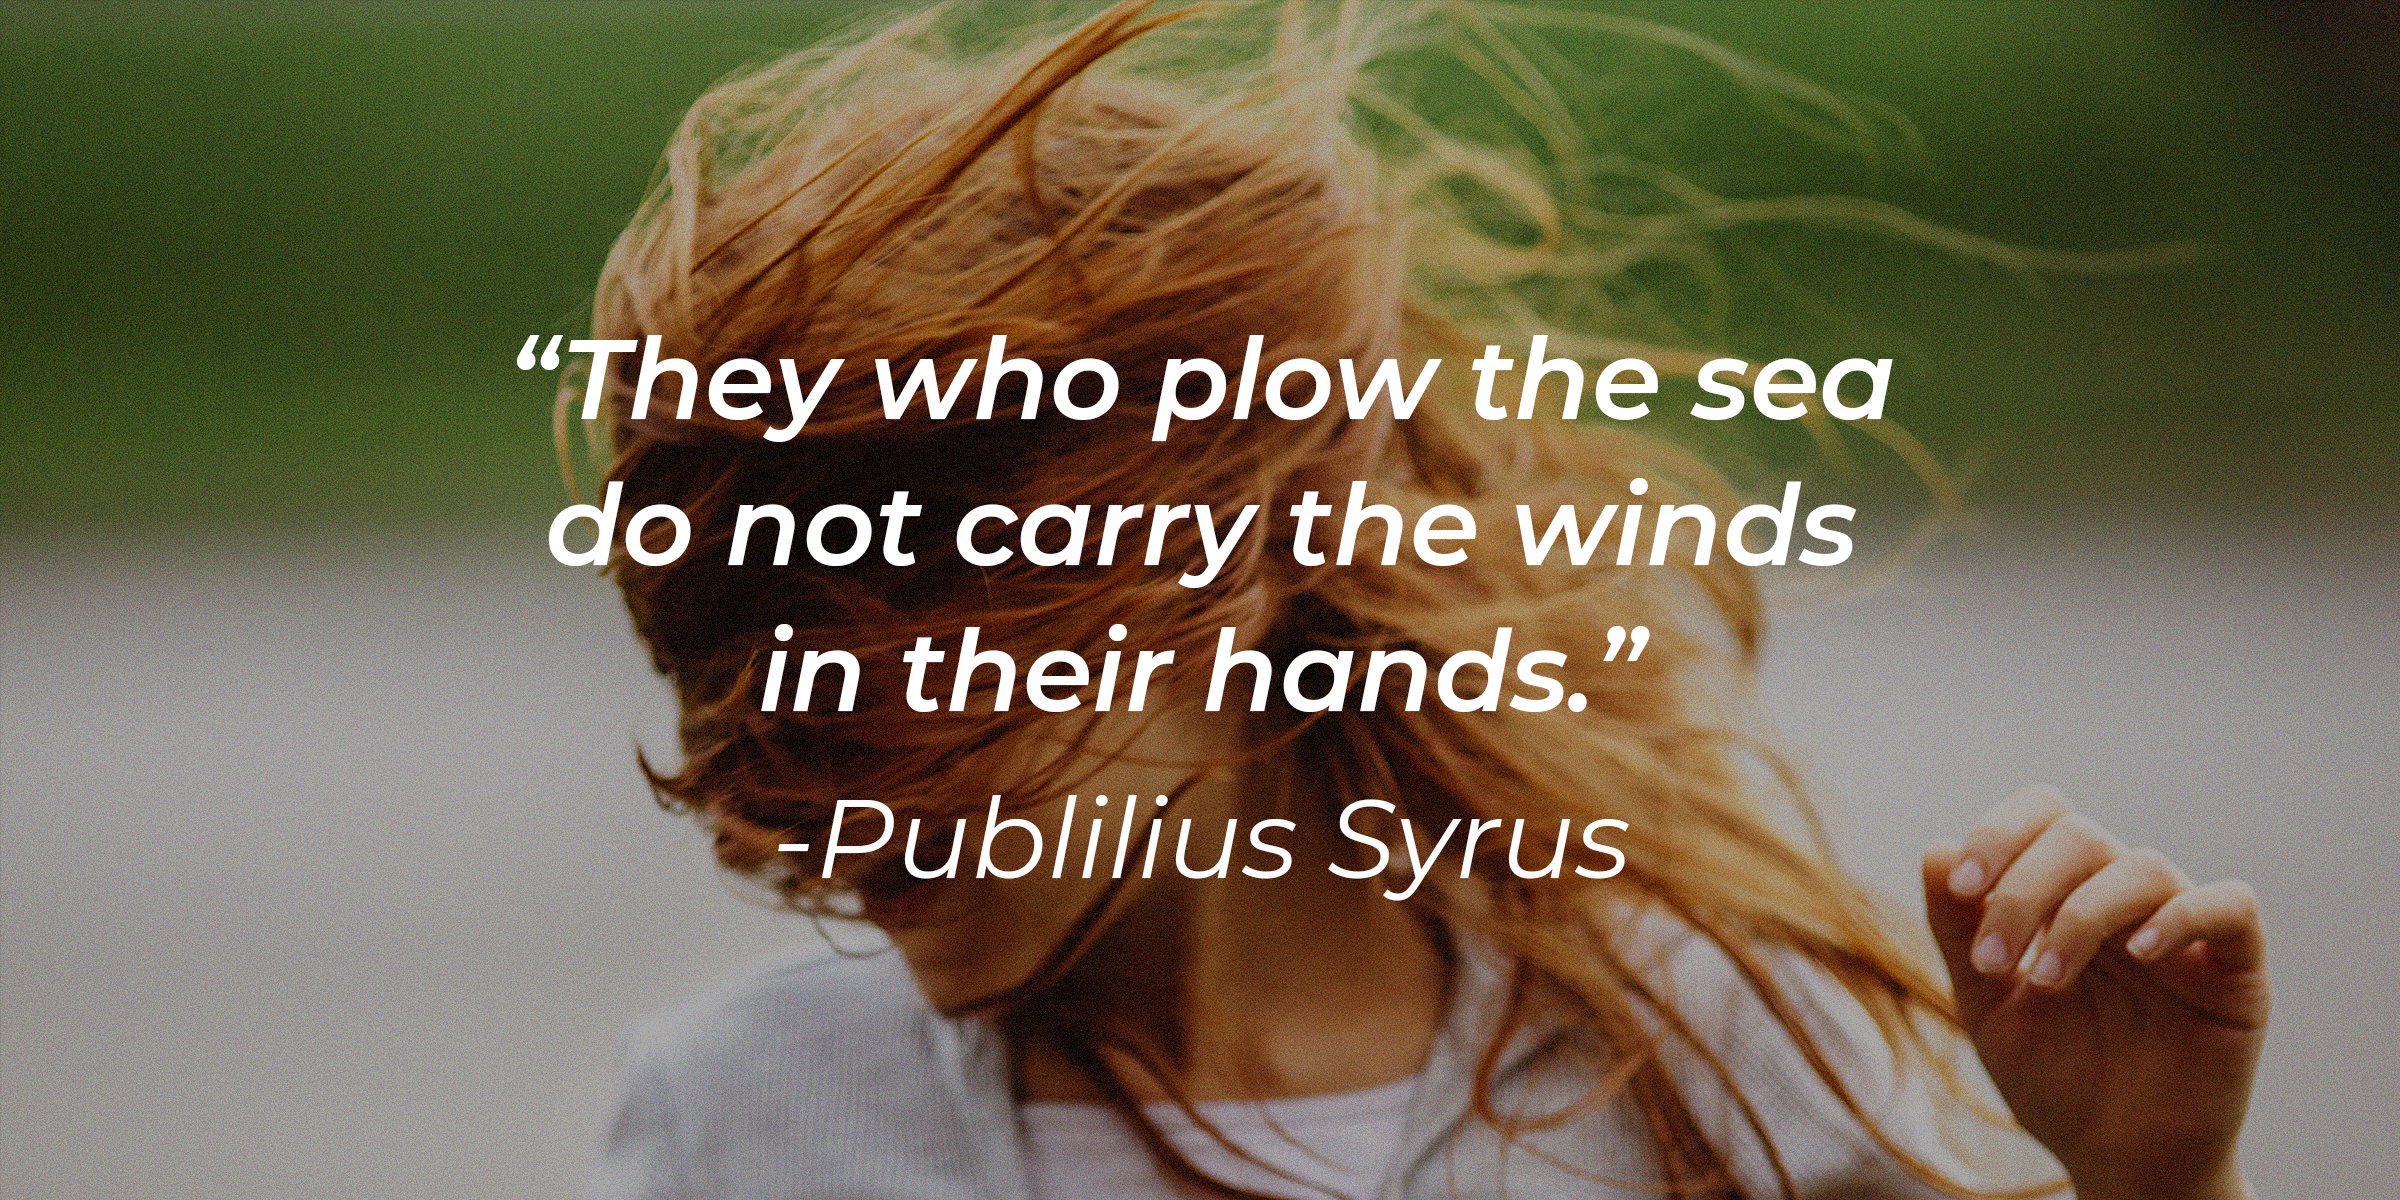 Unsplash | A woman's hair being swept by the wind with the quote, "They who plow the sea do not carry the winds in their hands."